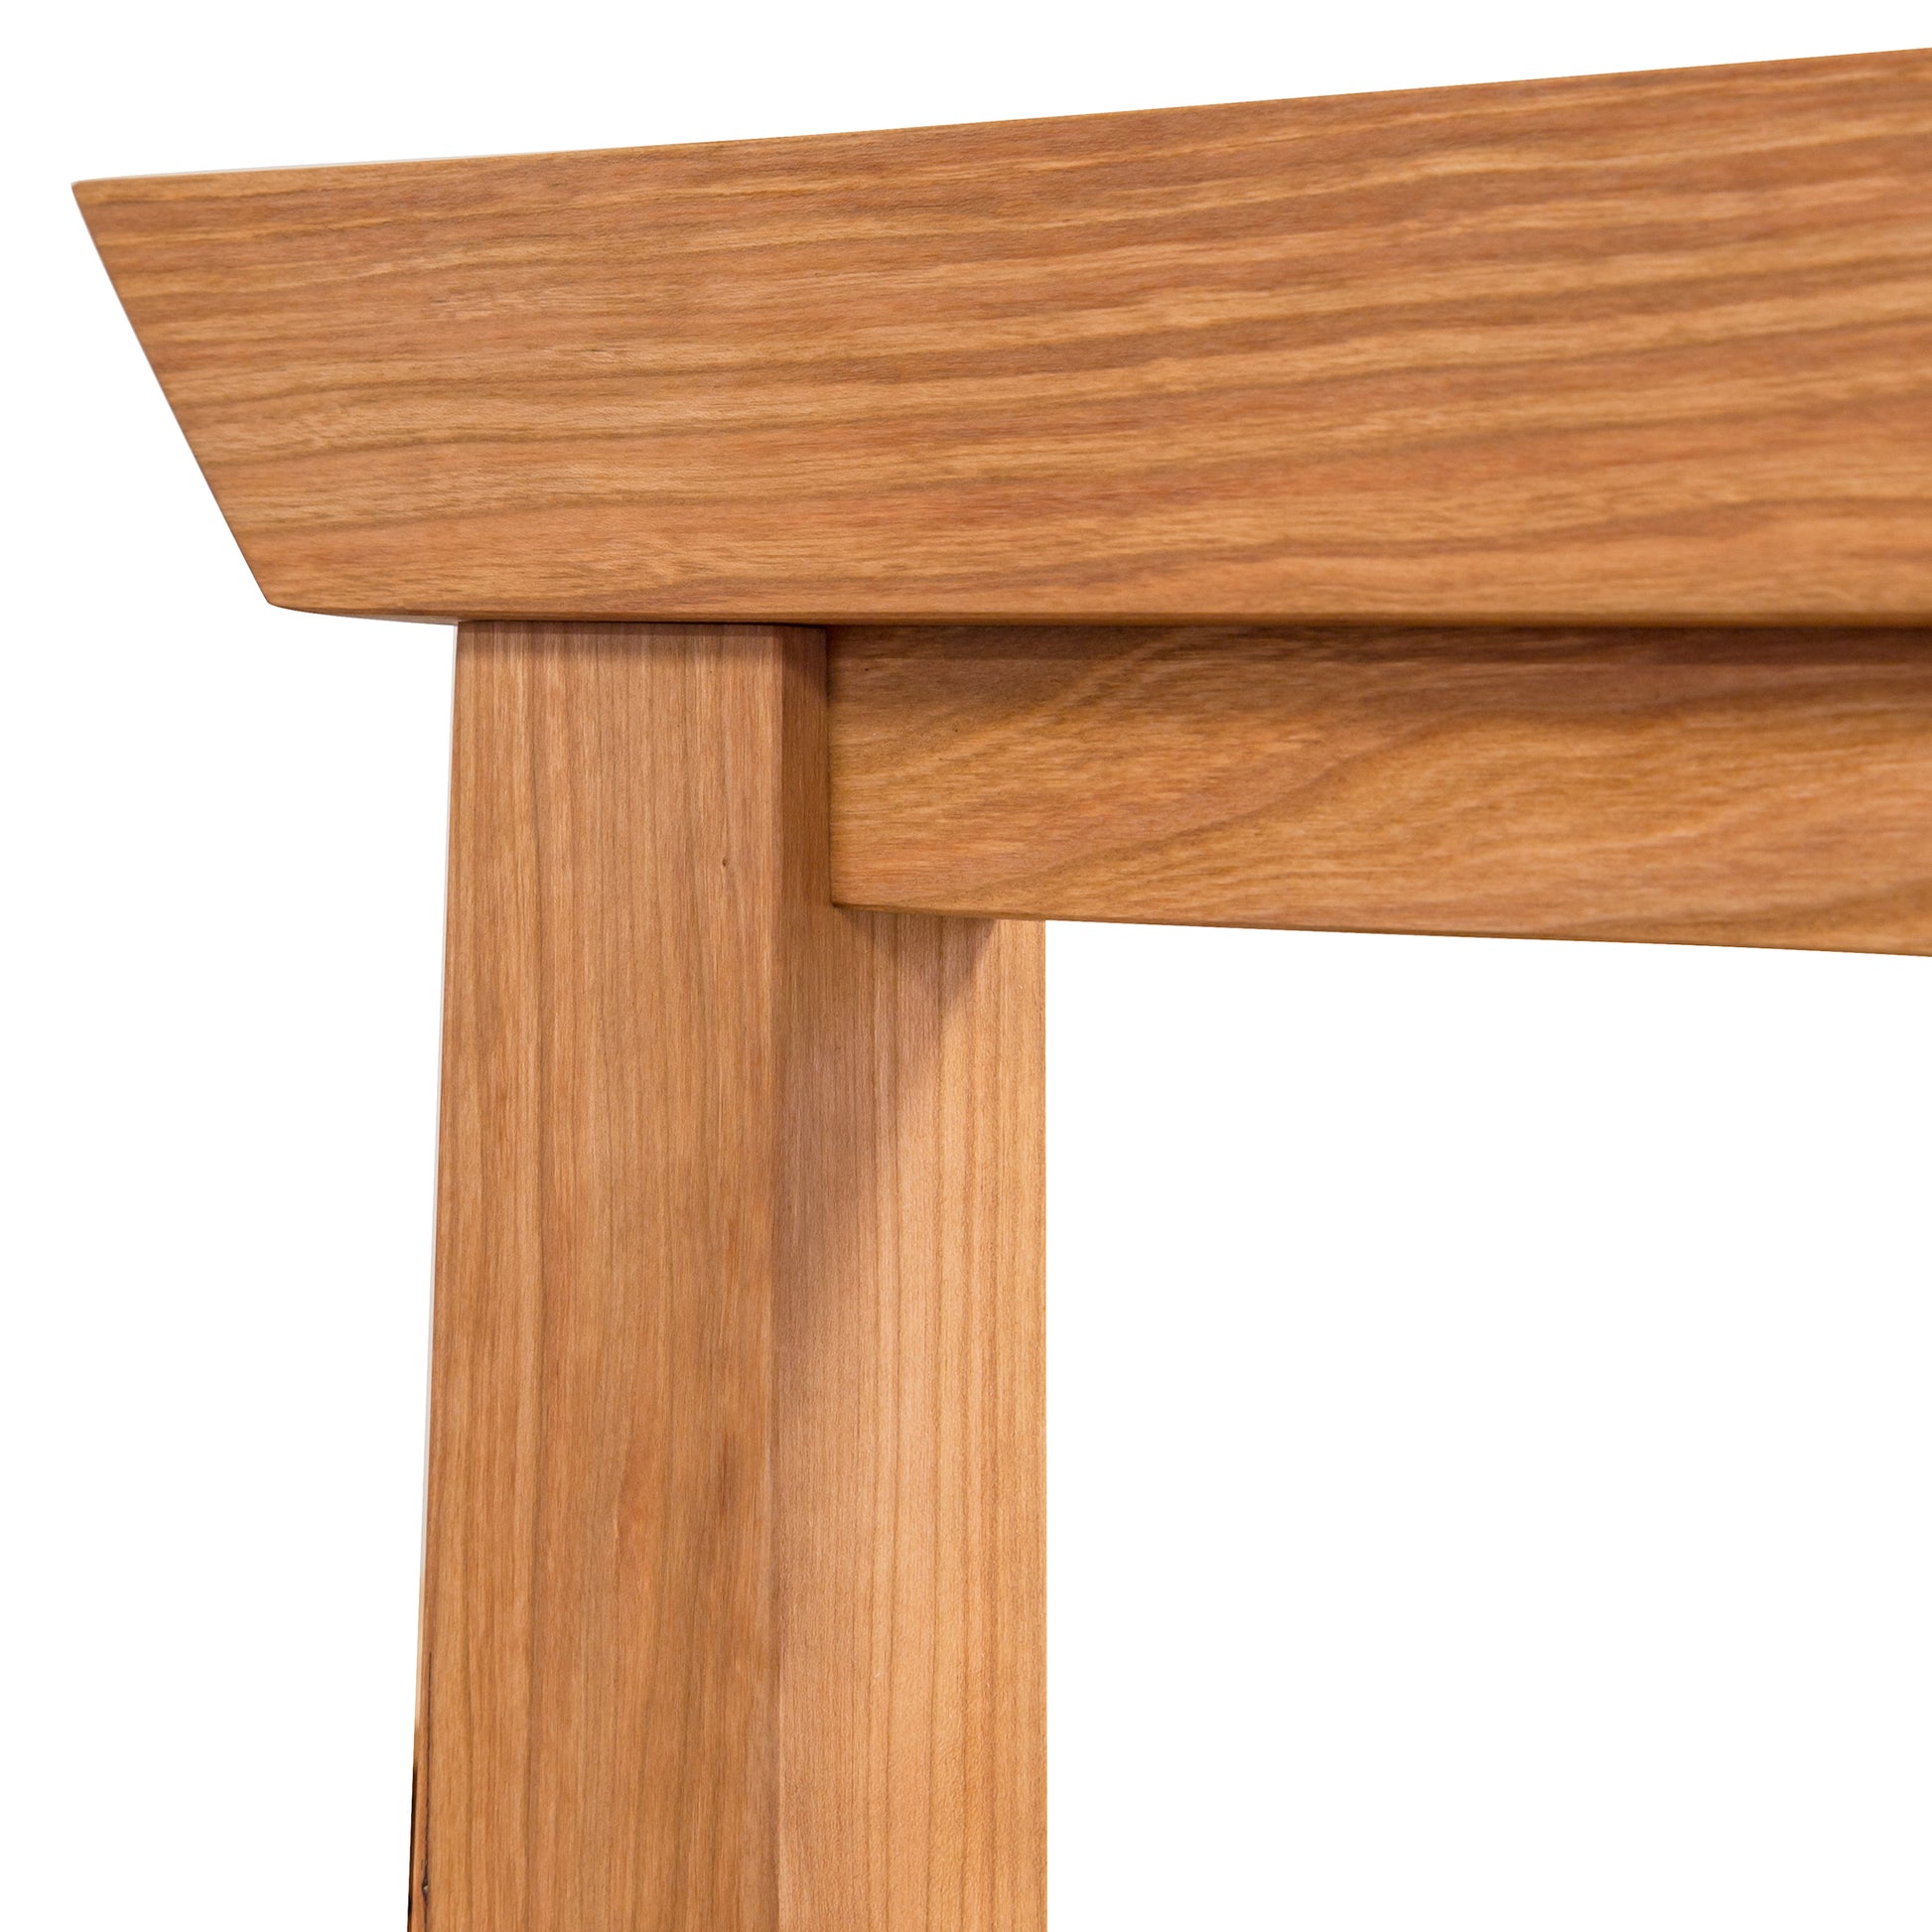 Close-up of a Maple Corner Woodworks Cherry Moon Pagoda Bed showing the smooth, finely finished horizontal top surface meeting the vertical leg at a right angle, highlighting the natural wood grain.